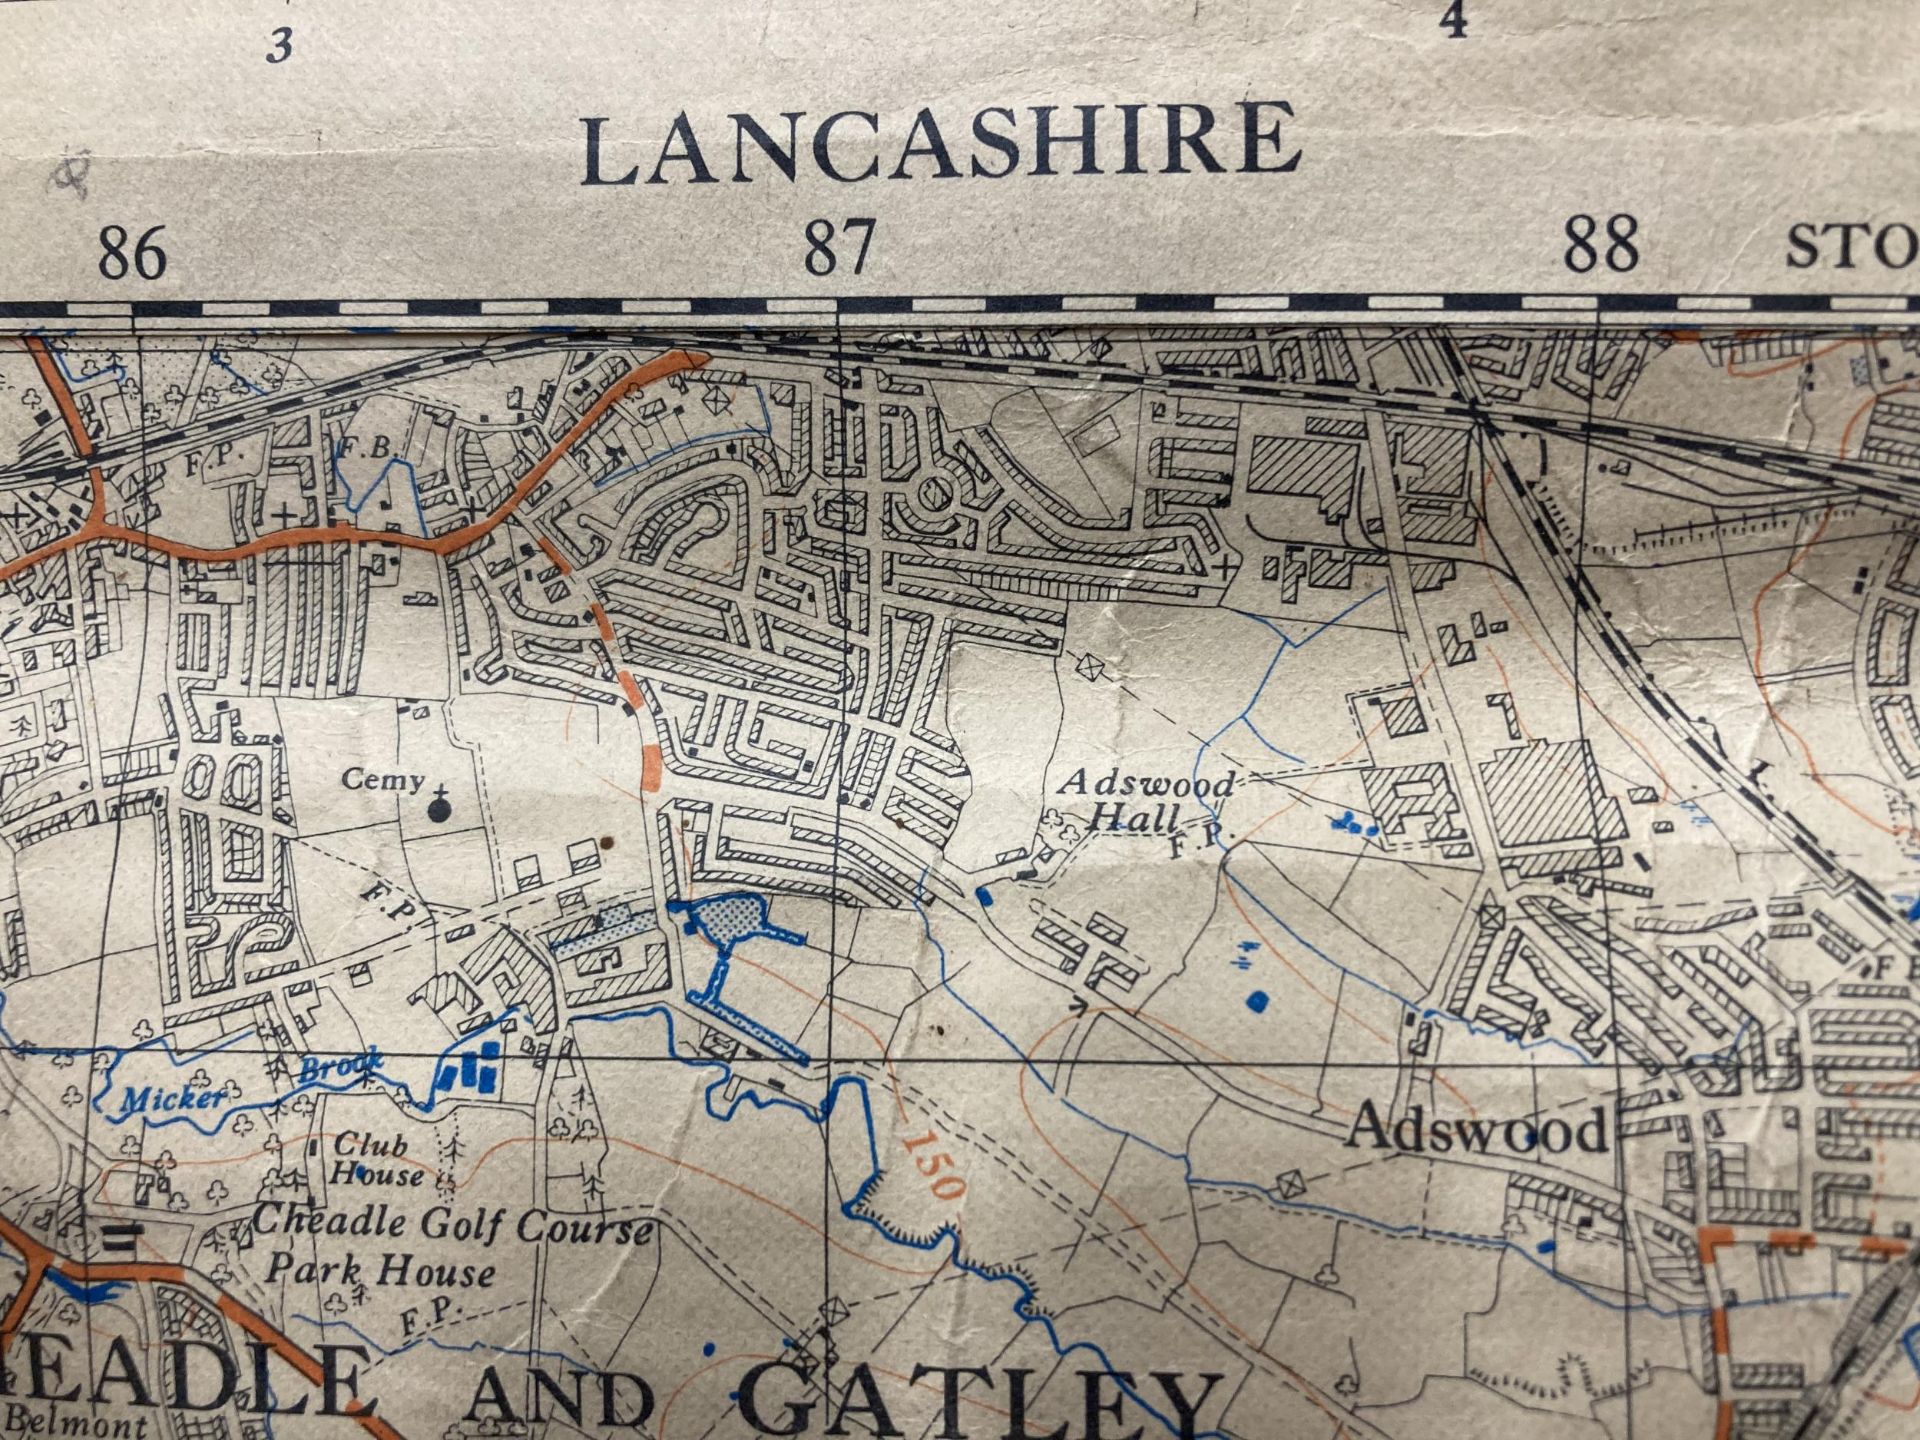 AN OLD ORDNANCE SURVEY MAP COVERING LANCASHIRE, CHESHIRE AND STAFFORDSHIRE APPROX 116 X 100 CM - Image 2 of 5